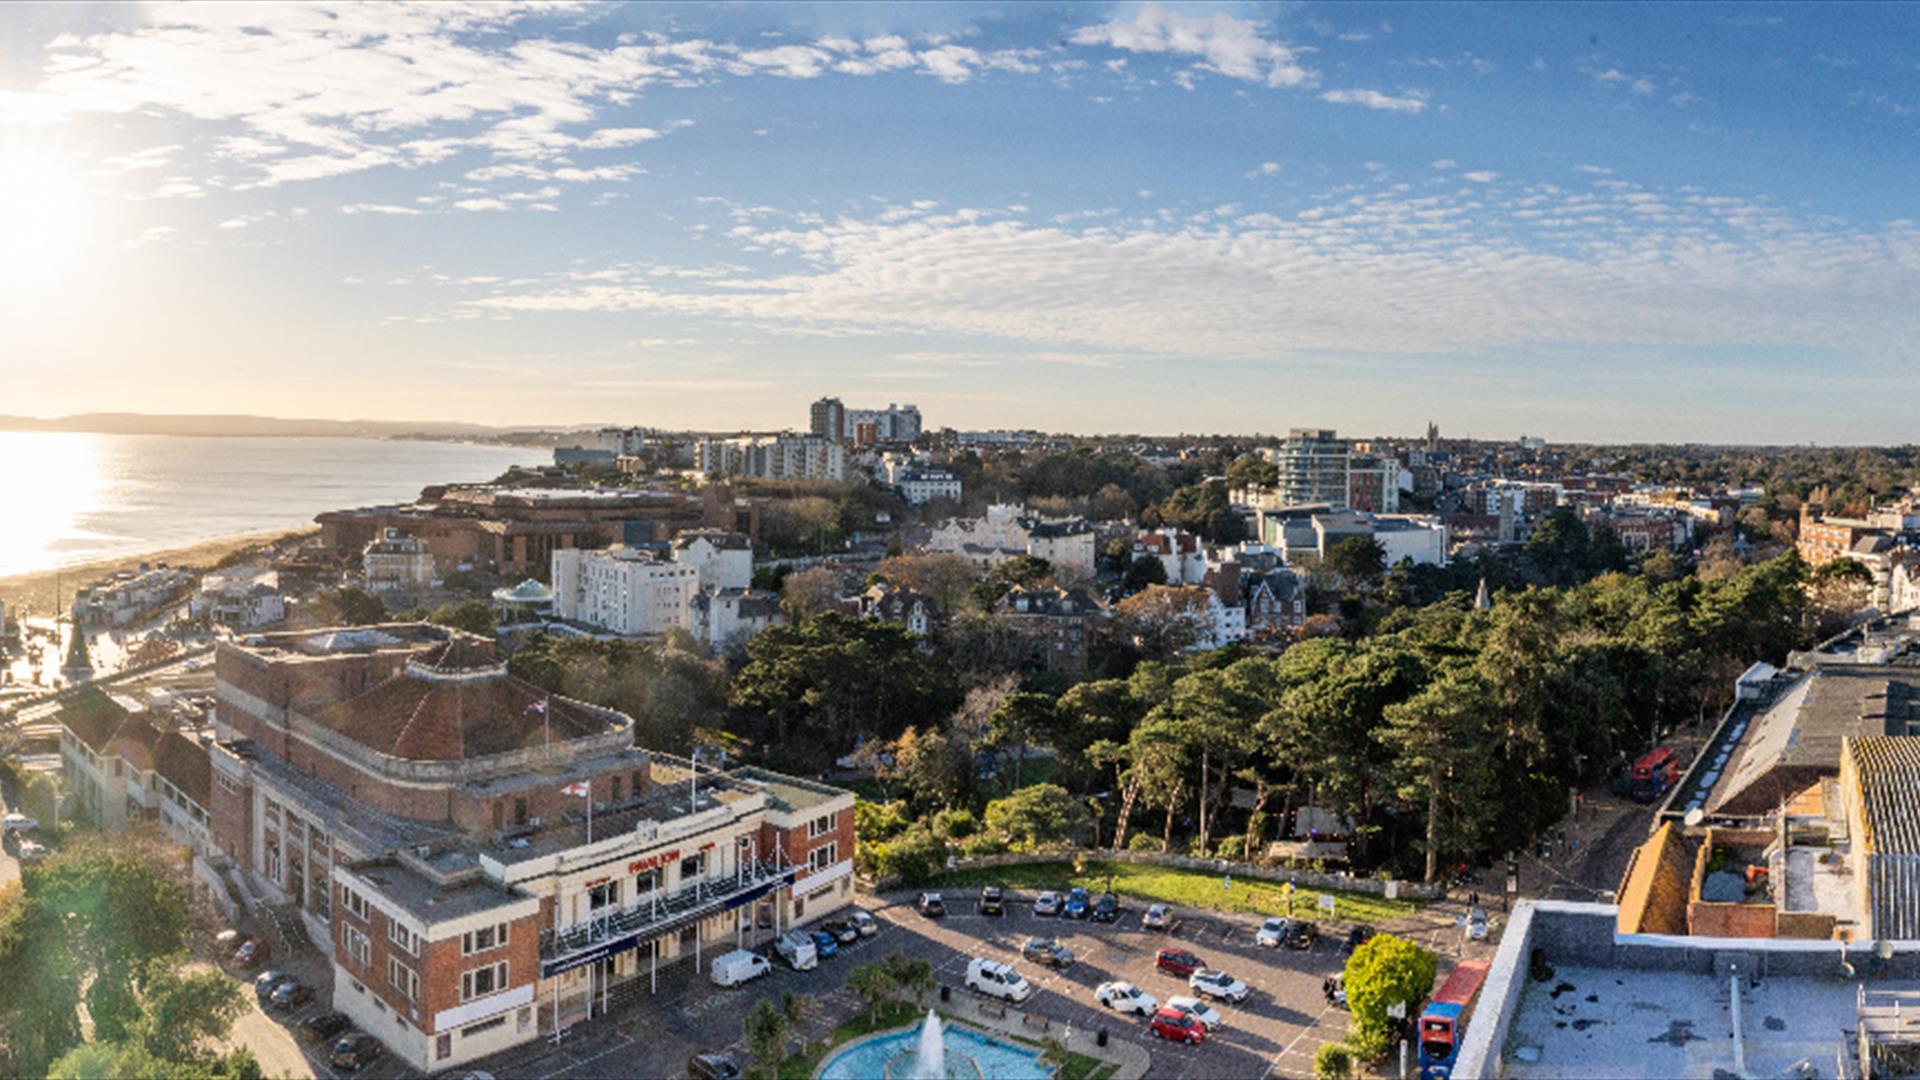 Panoramic image of Bournemouth town and the sun rise over the coastline taken from the top of a building